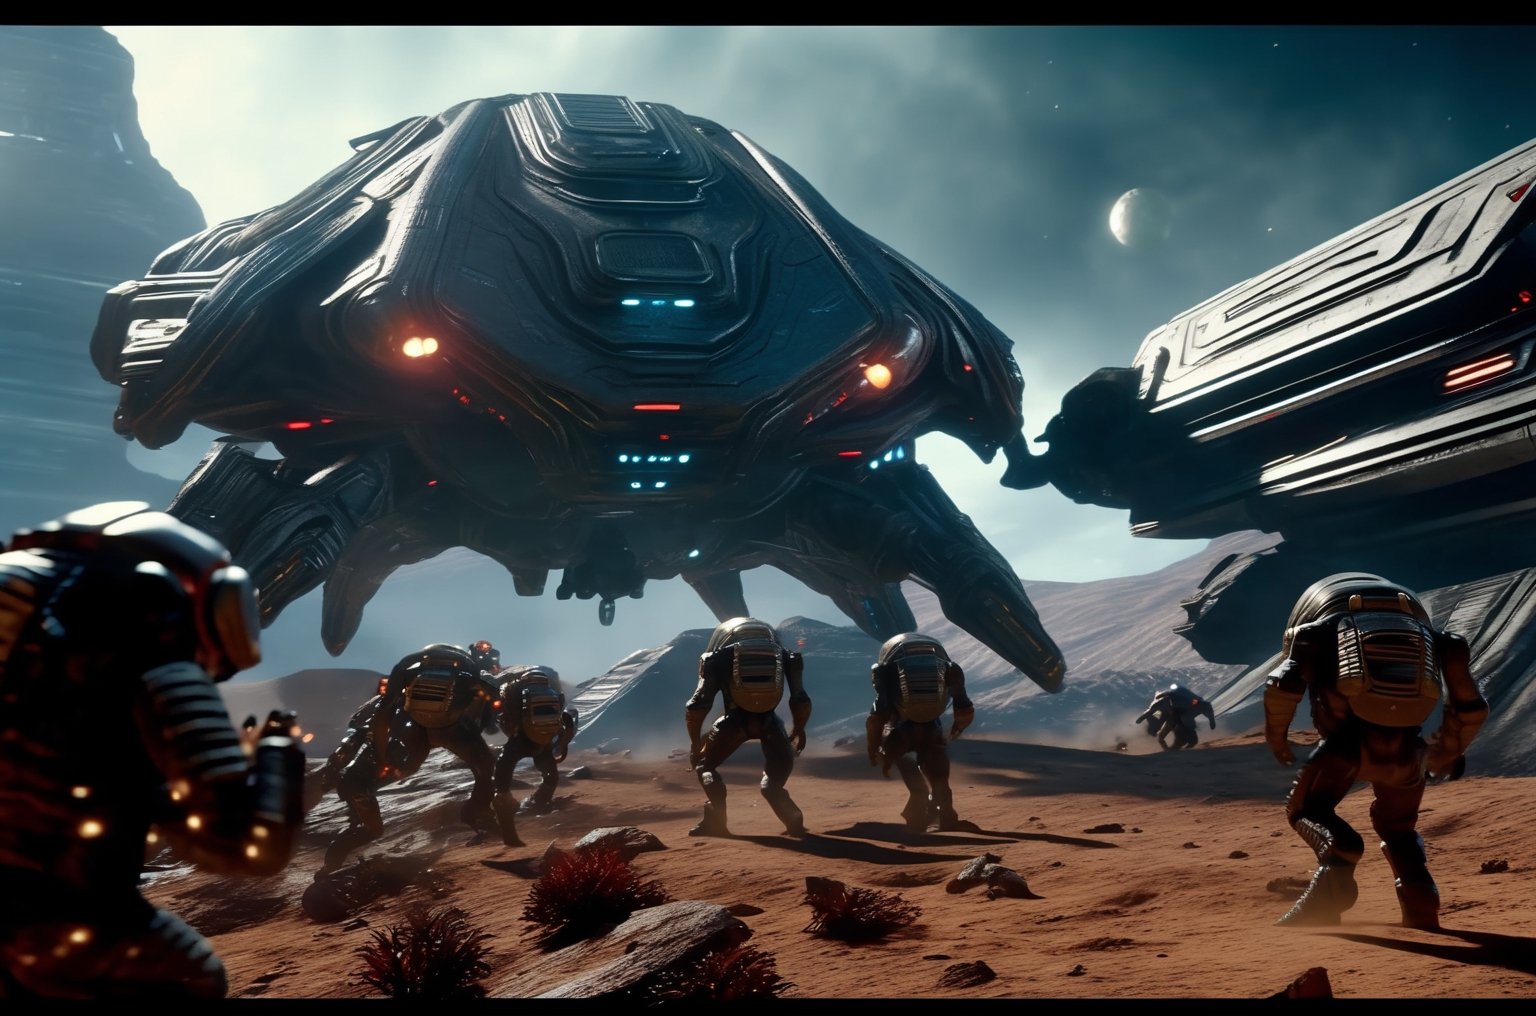 masterpiece, hyper realistic, cinematic scene, race against a band of evil mercenaries, to reach a legendary lost freighter called the Deepstar, Along their trek through the universe, they encounter (monsters), (aliens), (robots) and something even worse., action_pose, movie still, detailed_background,hackedtech